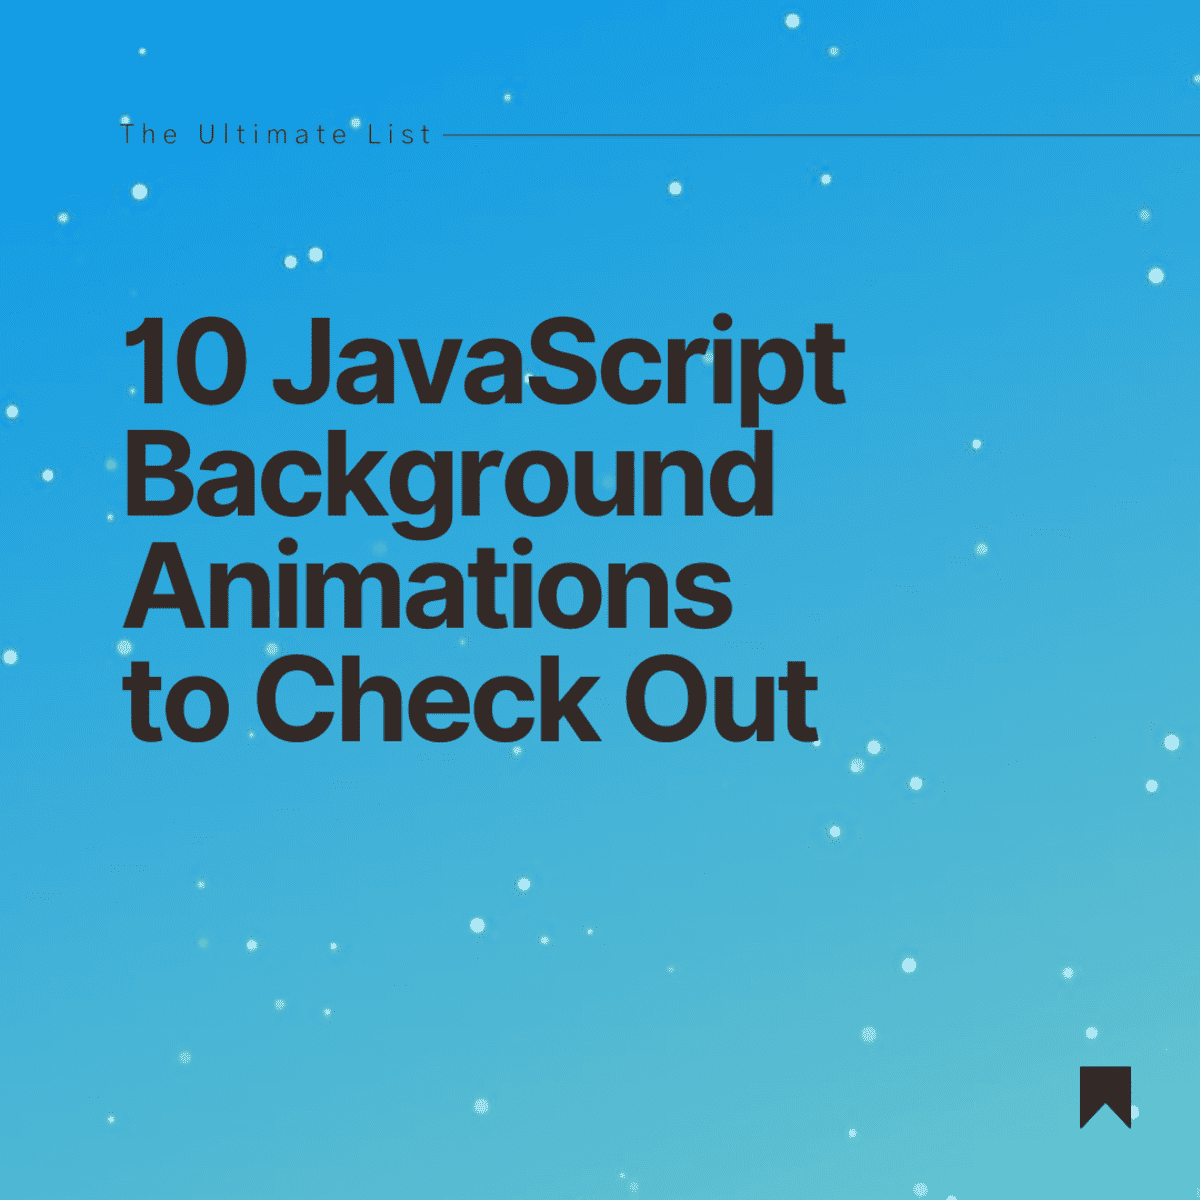 10 JavaScript Background Animations You Can Quickly Add to Your Site -  TurboFuture